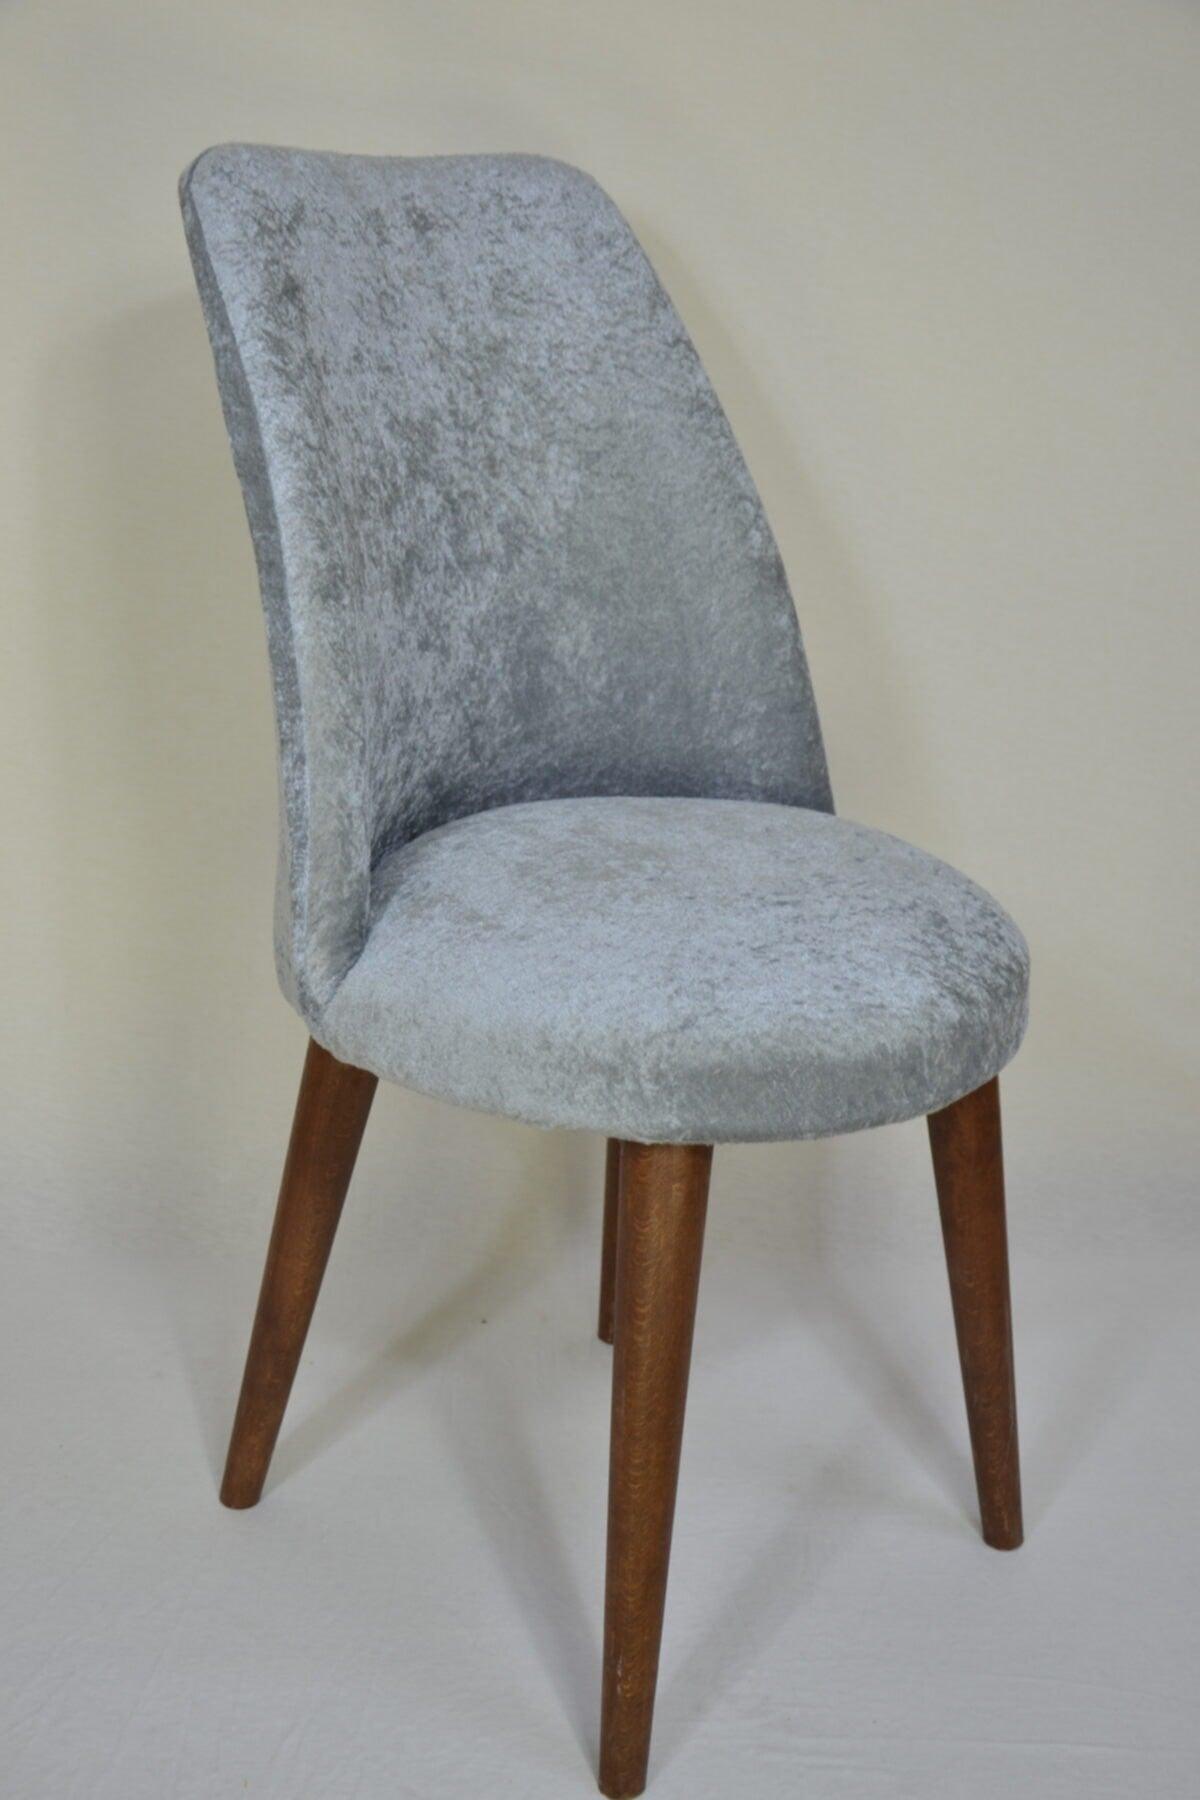 Retro Oval Chair Cover - Swordslife